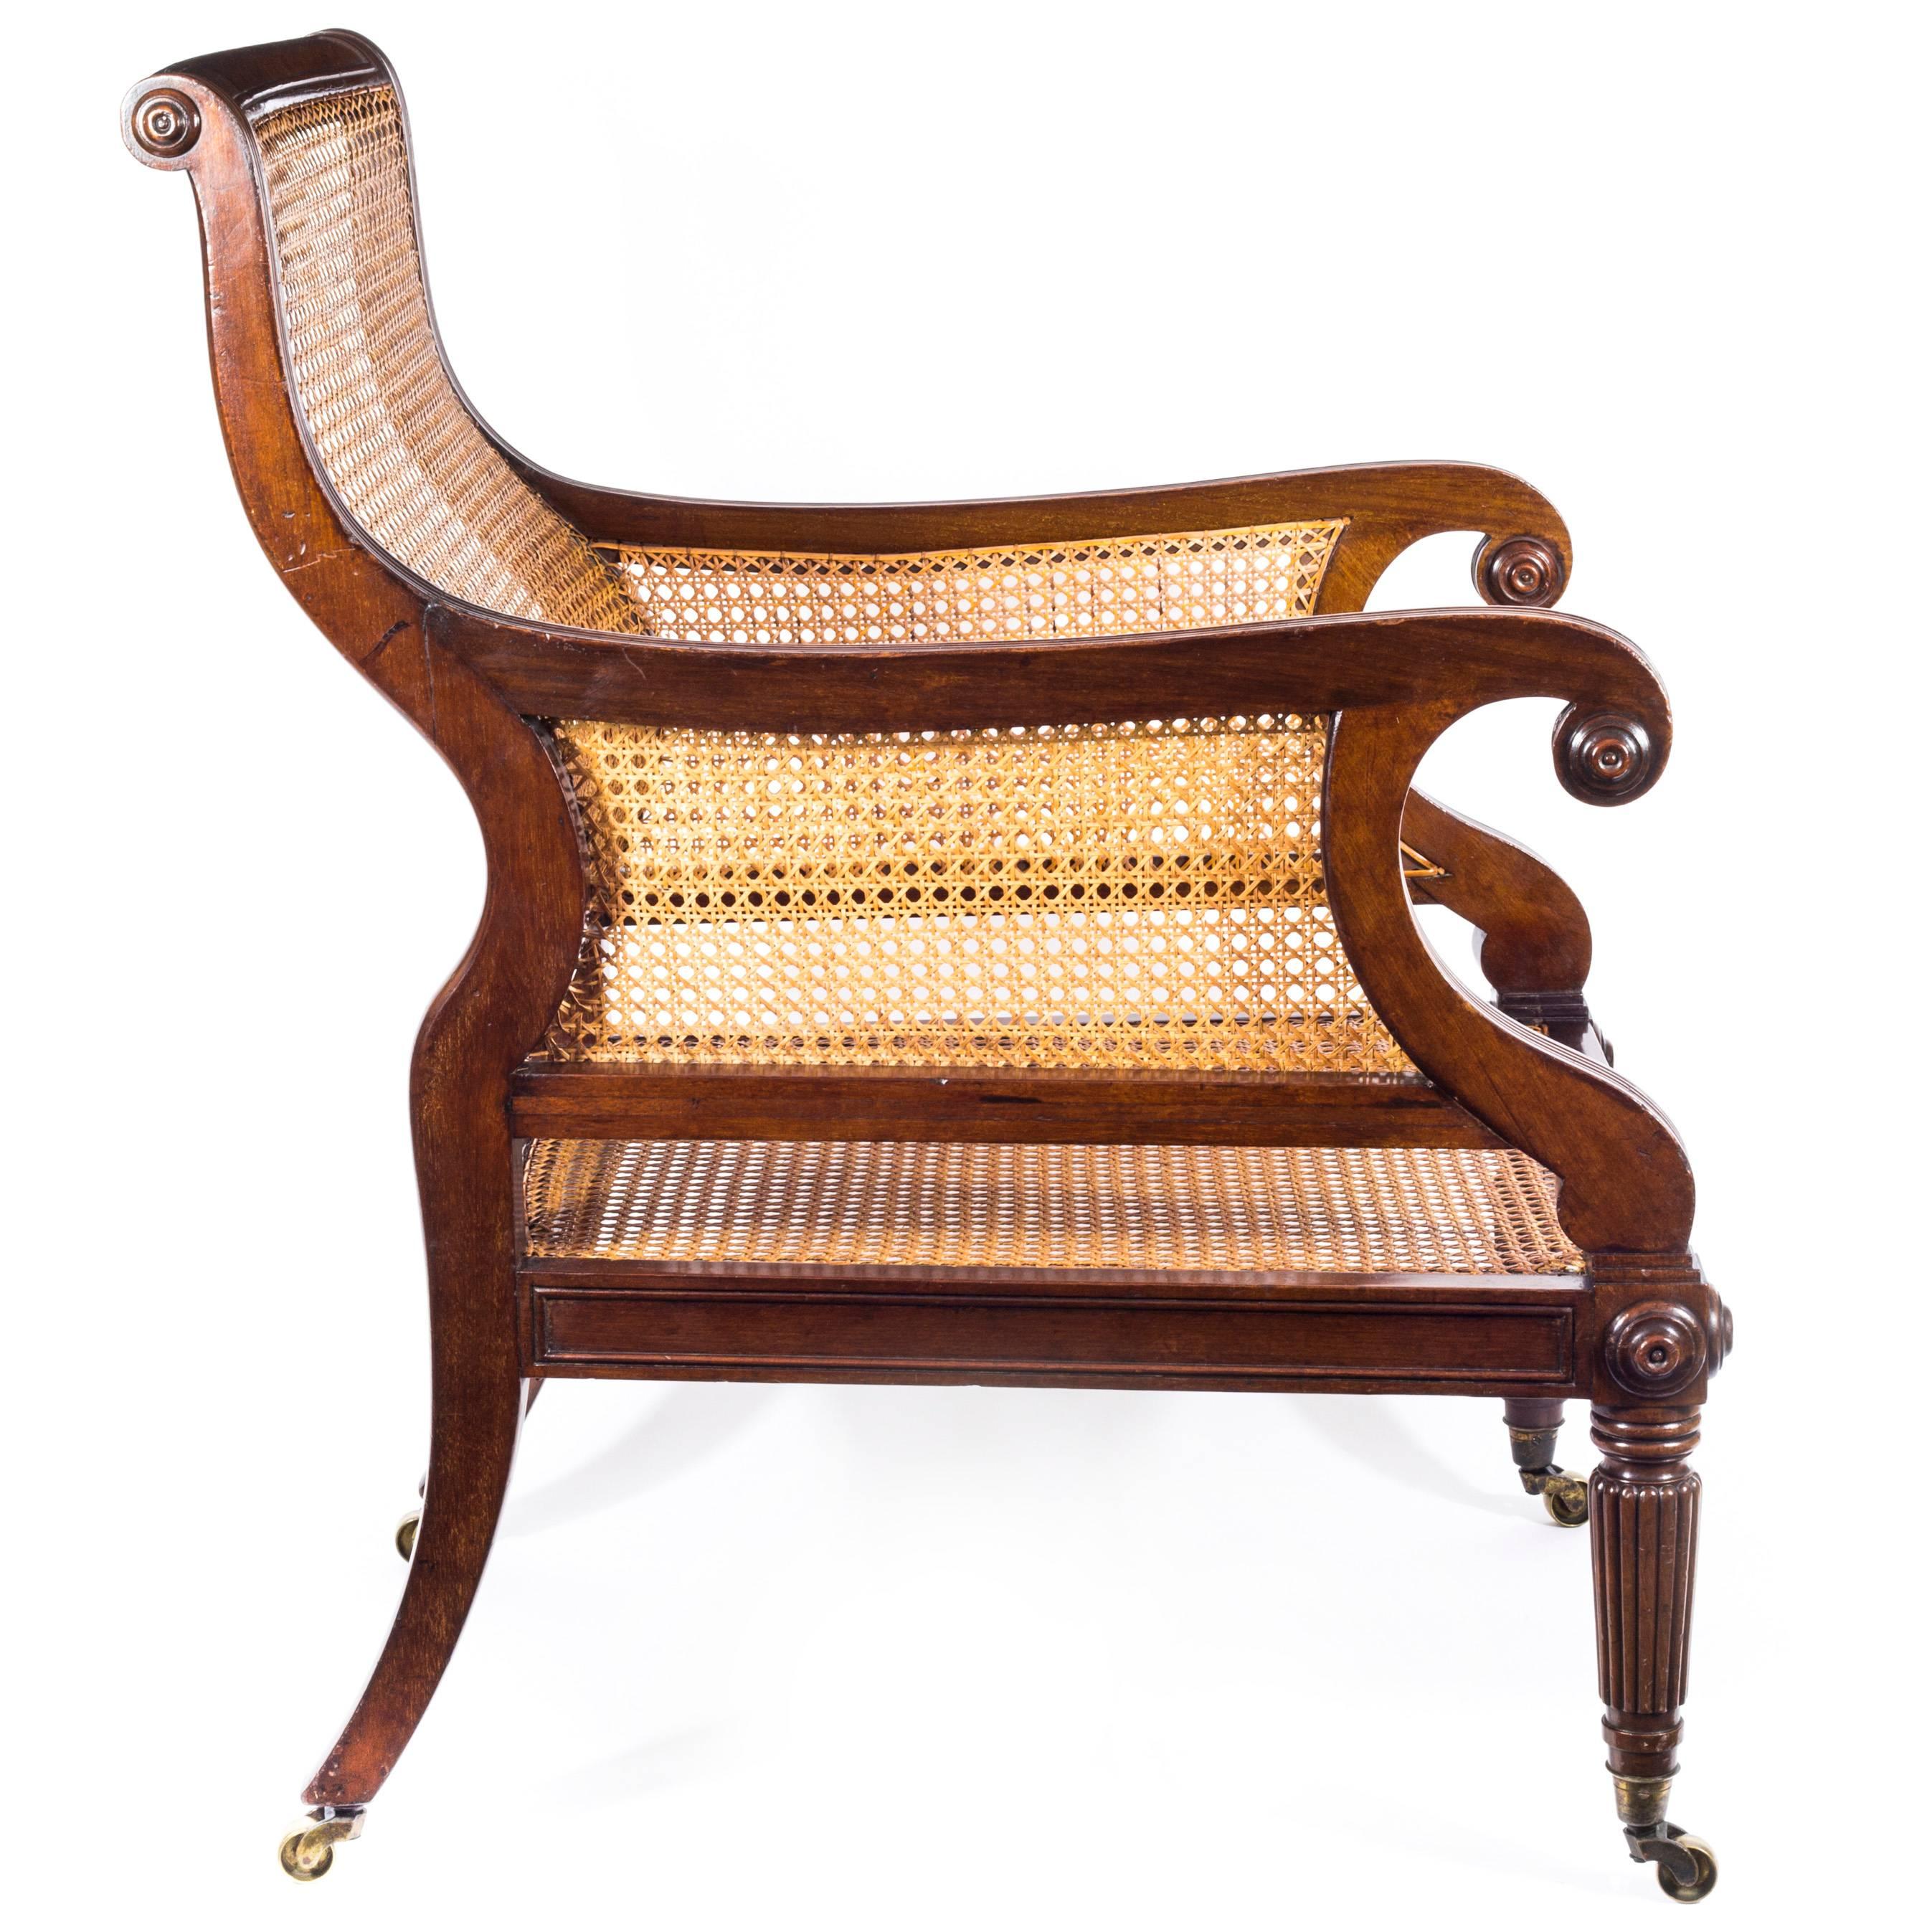 A superb early Regency period library bergère armchair in mahogany, attributed to Gillows of Lancaster and London

English, circa 1810

The curved blind-caned back within a moulded frame and reeded scrolled blind-caned arms, above a rectangular